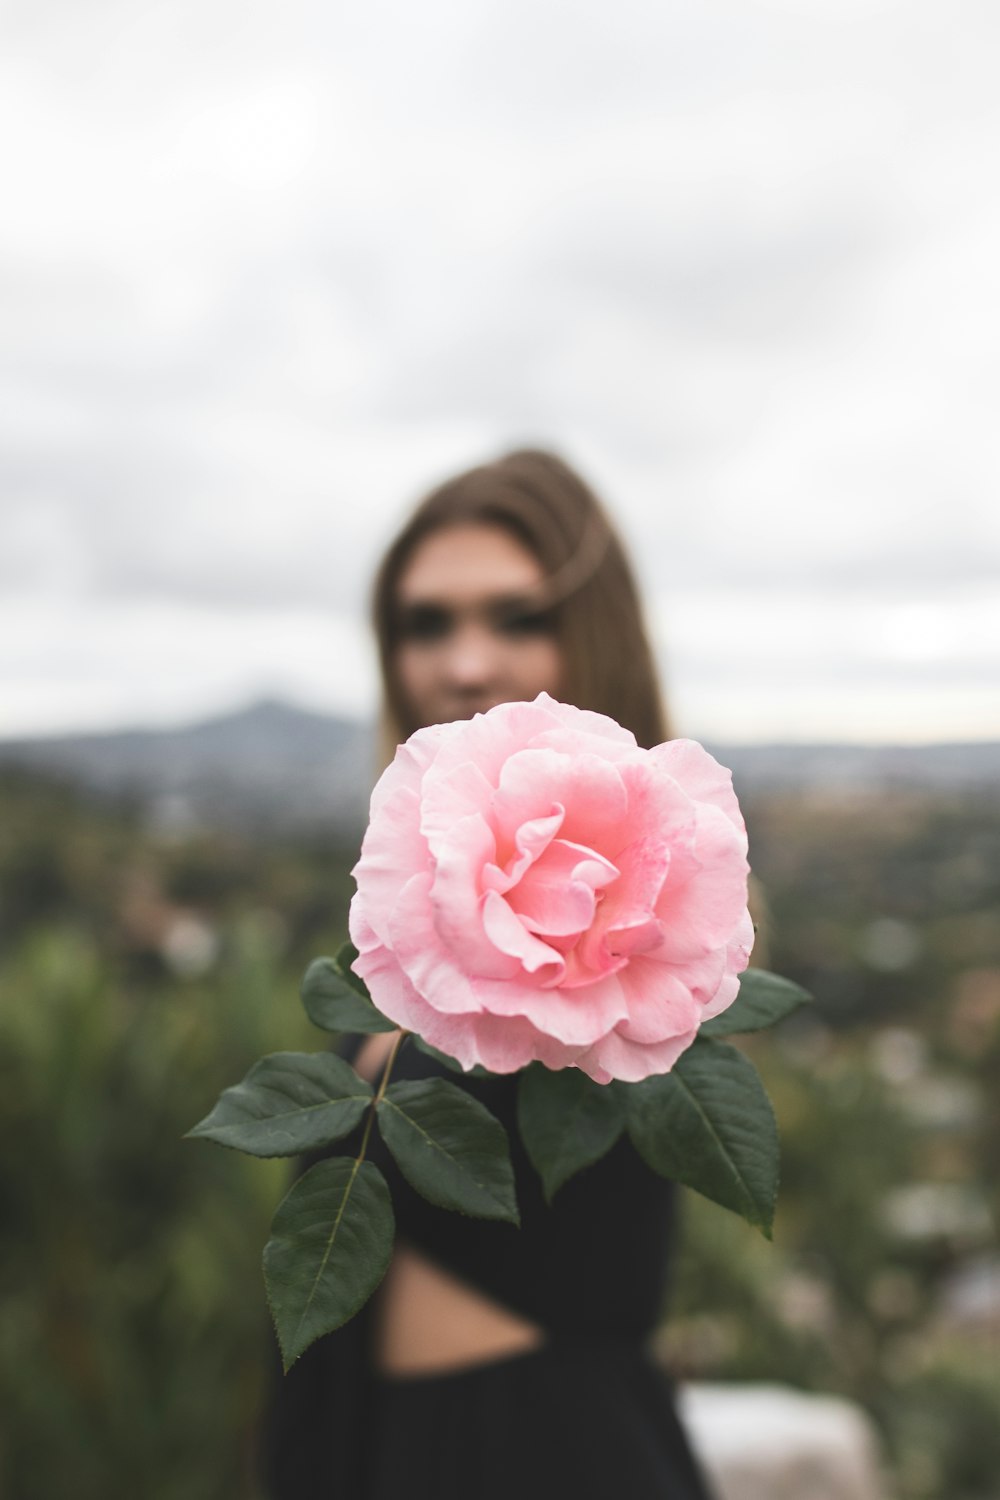 woman holding pink flower during daytime